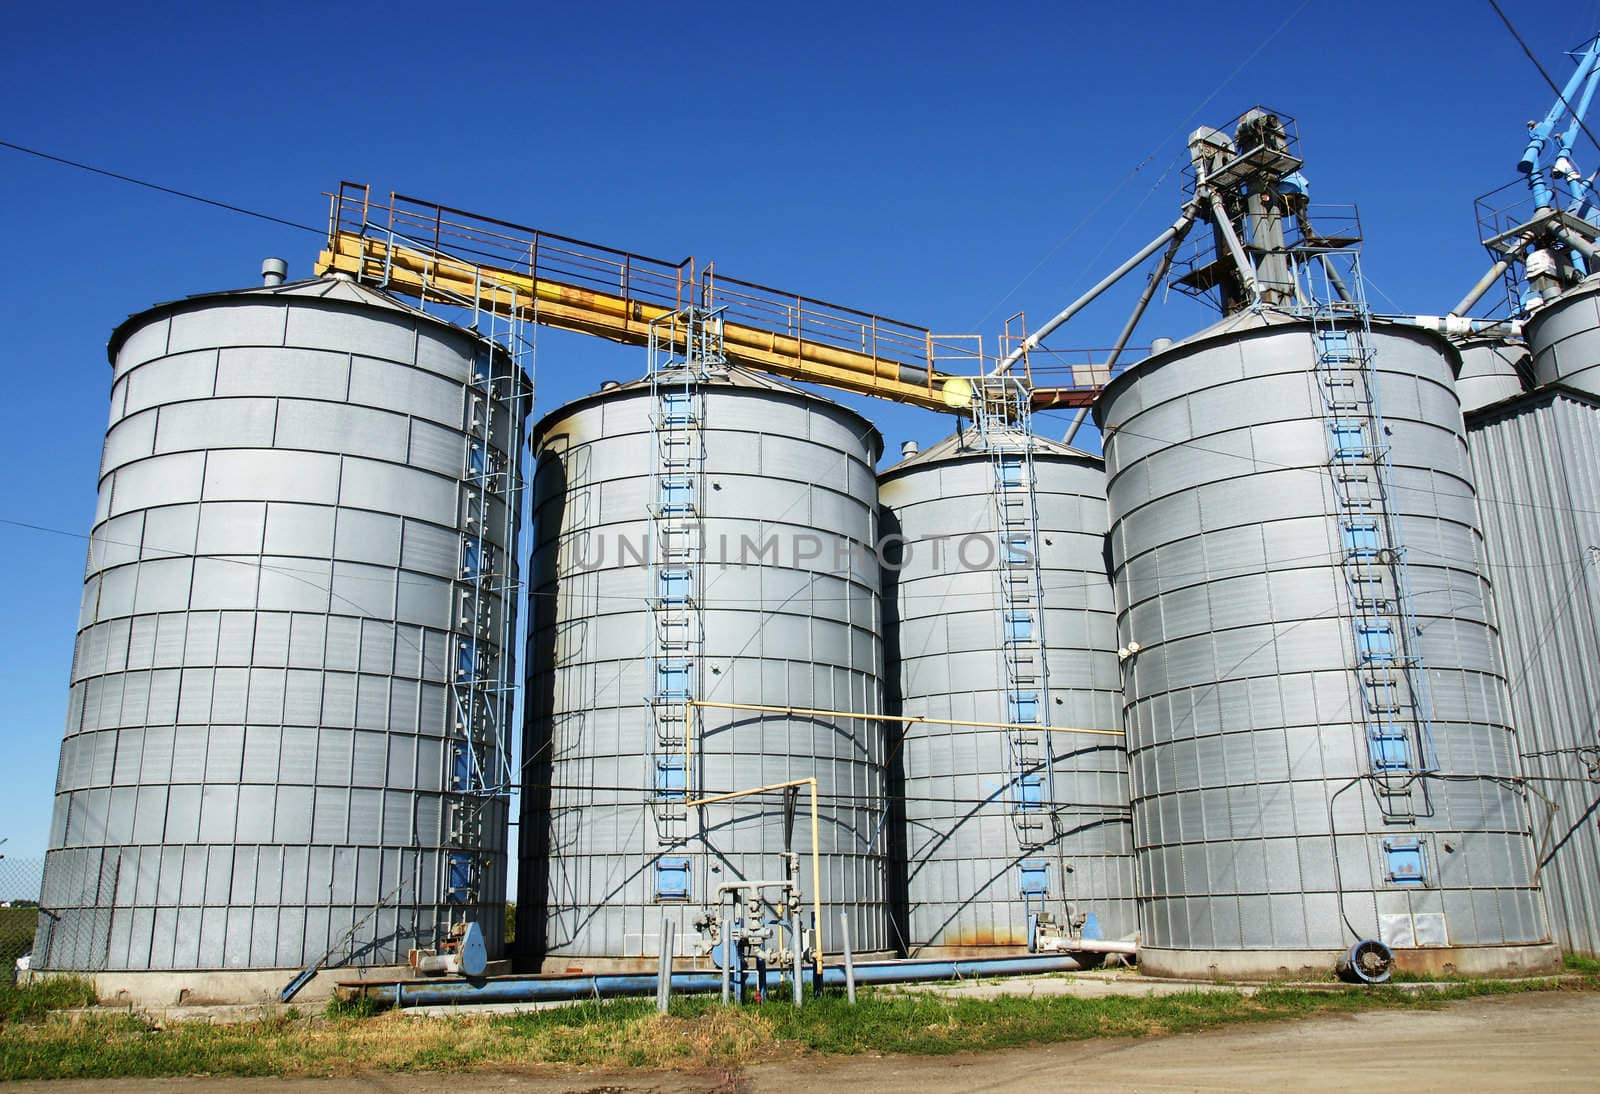 Agriculture: Group of silos filled with cereal grain against blue sky.